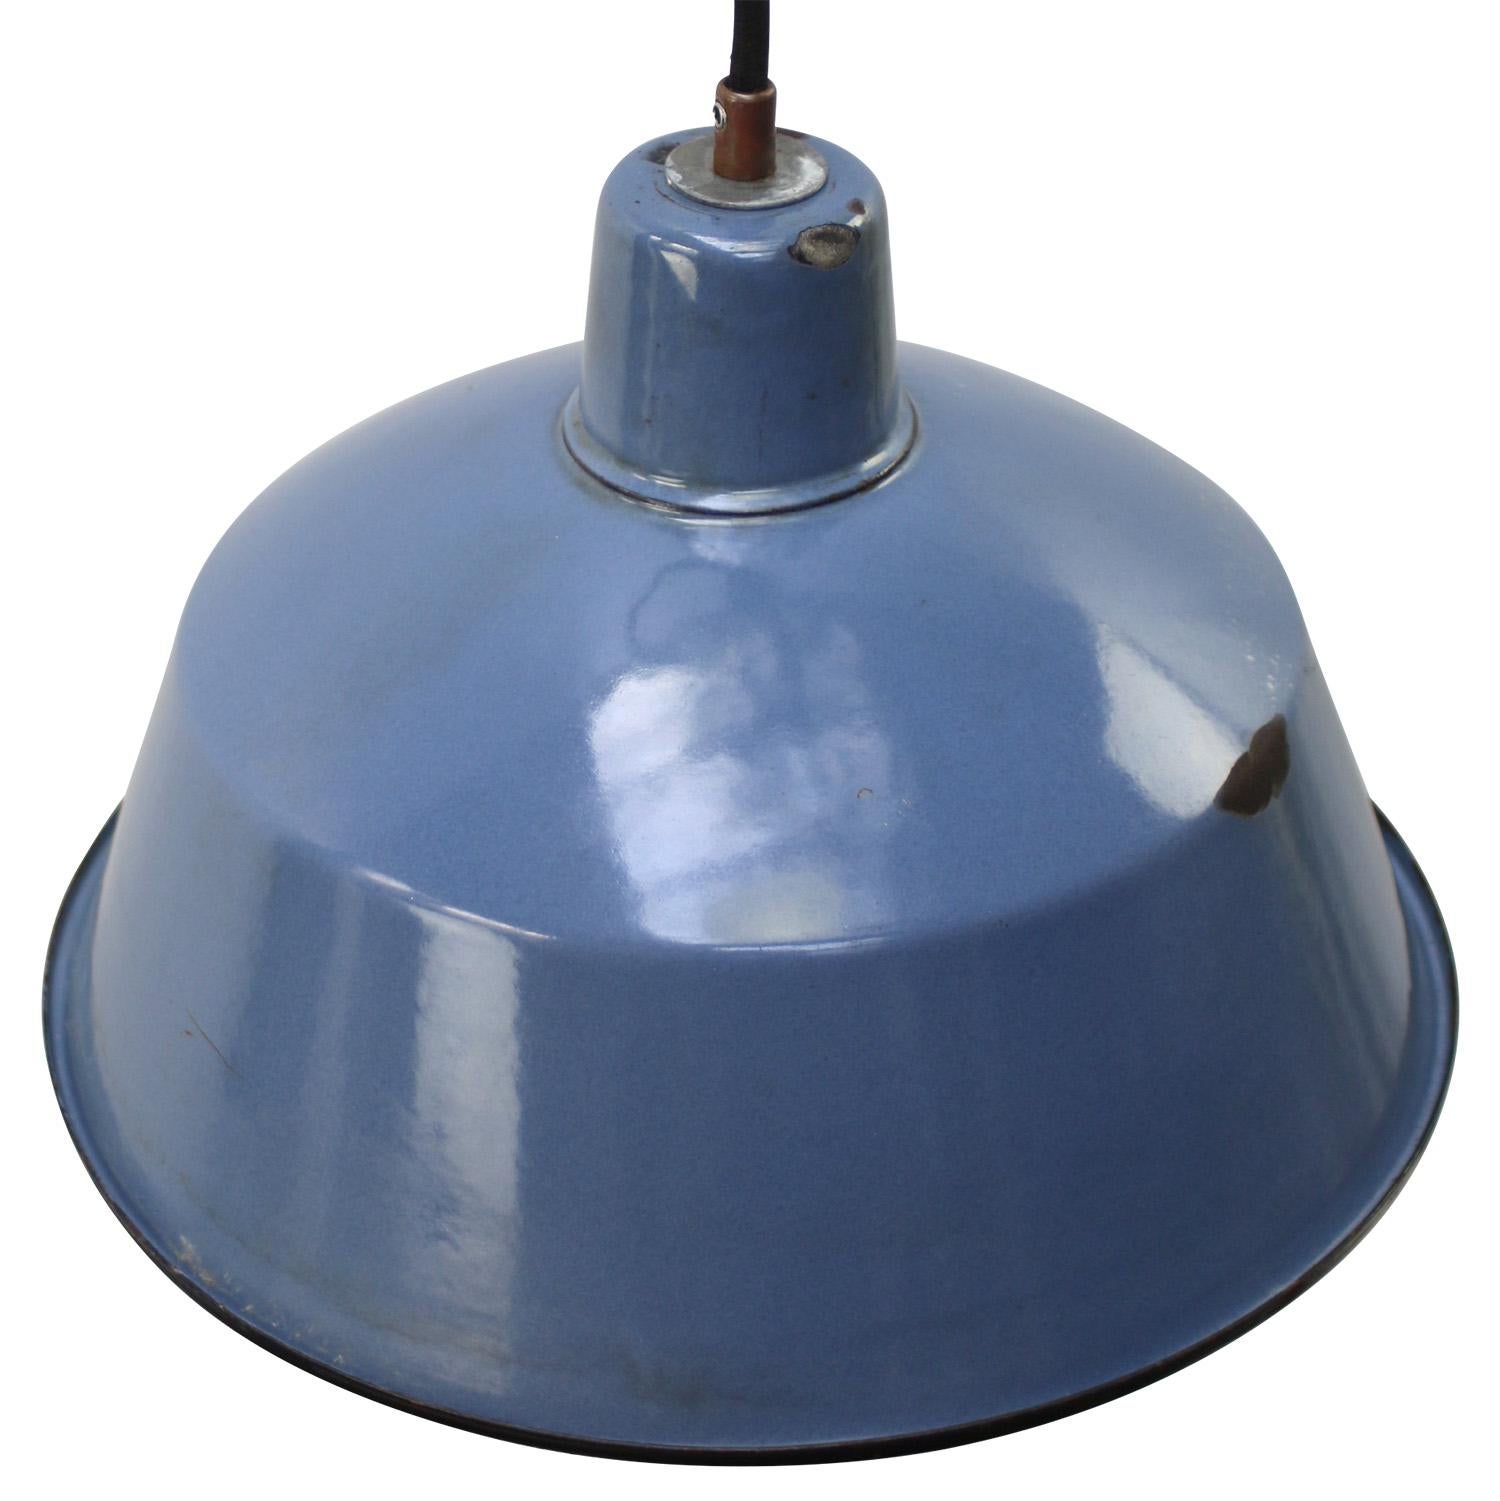 Industrial factory pendant
Blue enamel white interior

Weight: 1.50 kg / 3.3 lb

Priced per individual item. All lamps have been made suitable by international standards for incandescent light bulbs, energy-efficient and LED bulbs. E26/E27 bulb